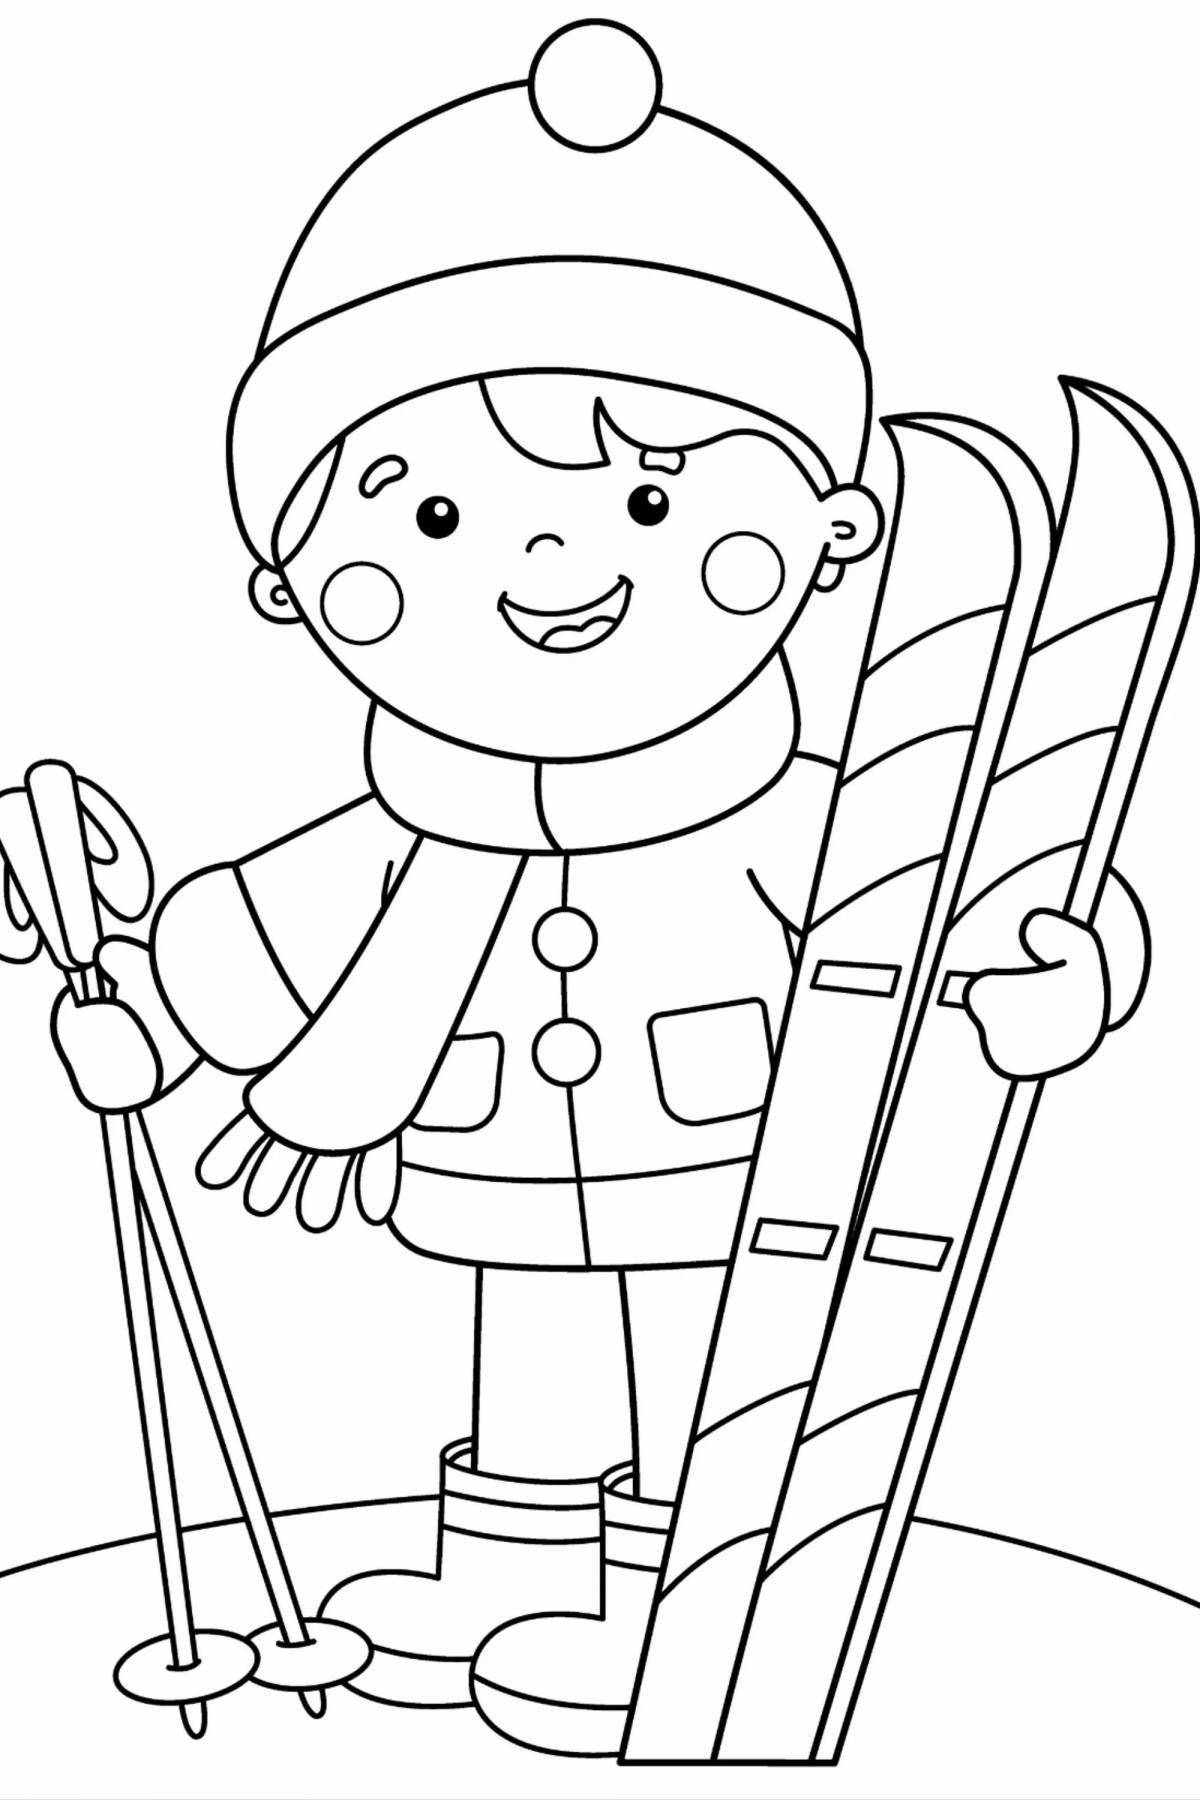 Fascinating skis for 3-4 year olds